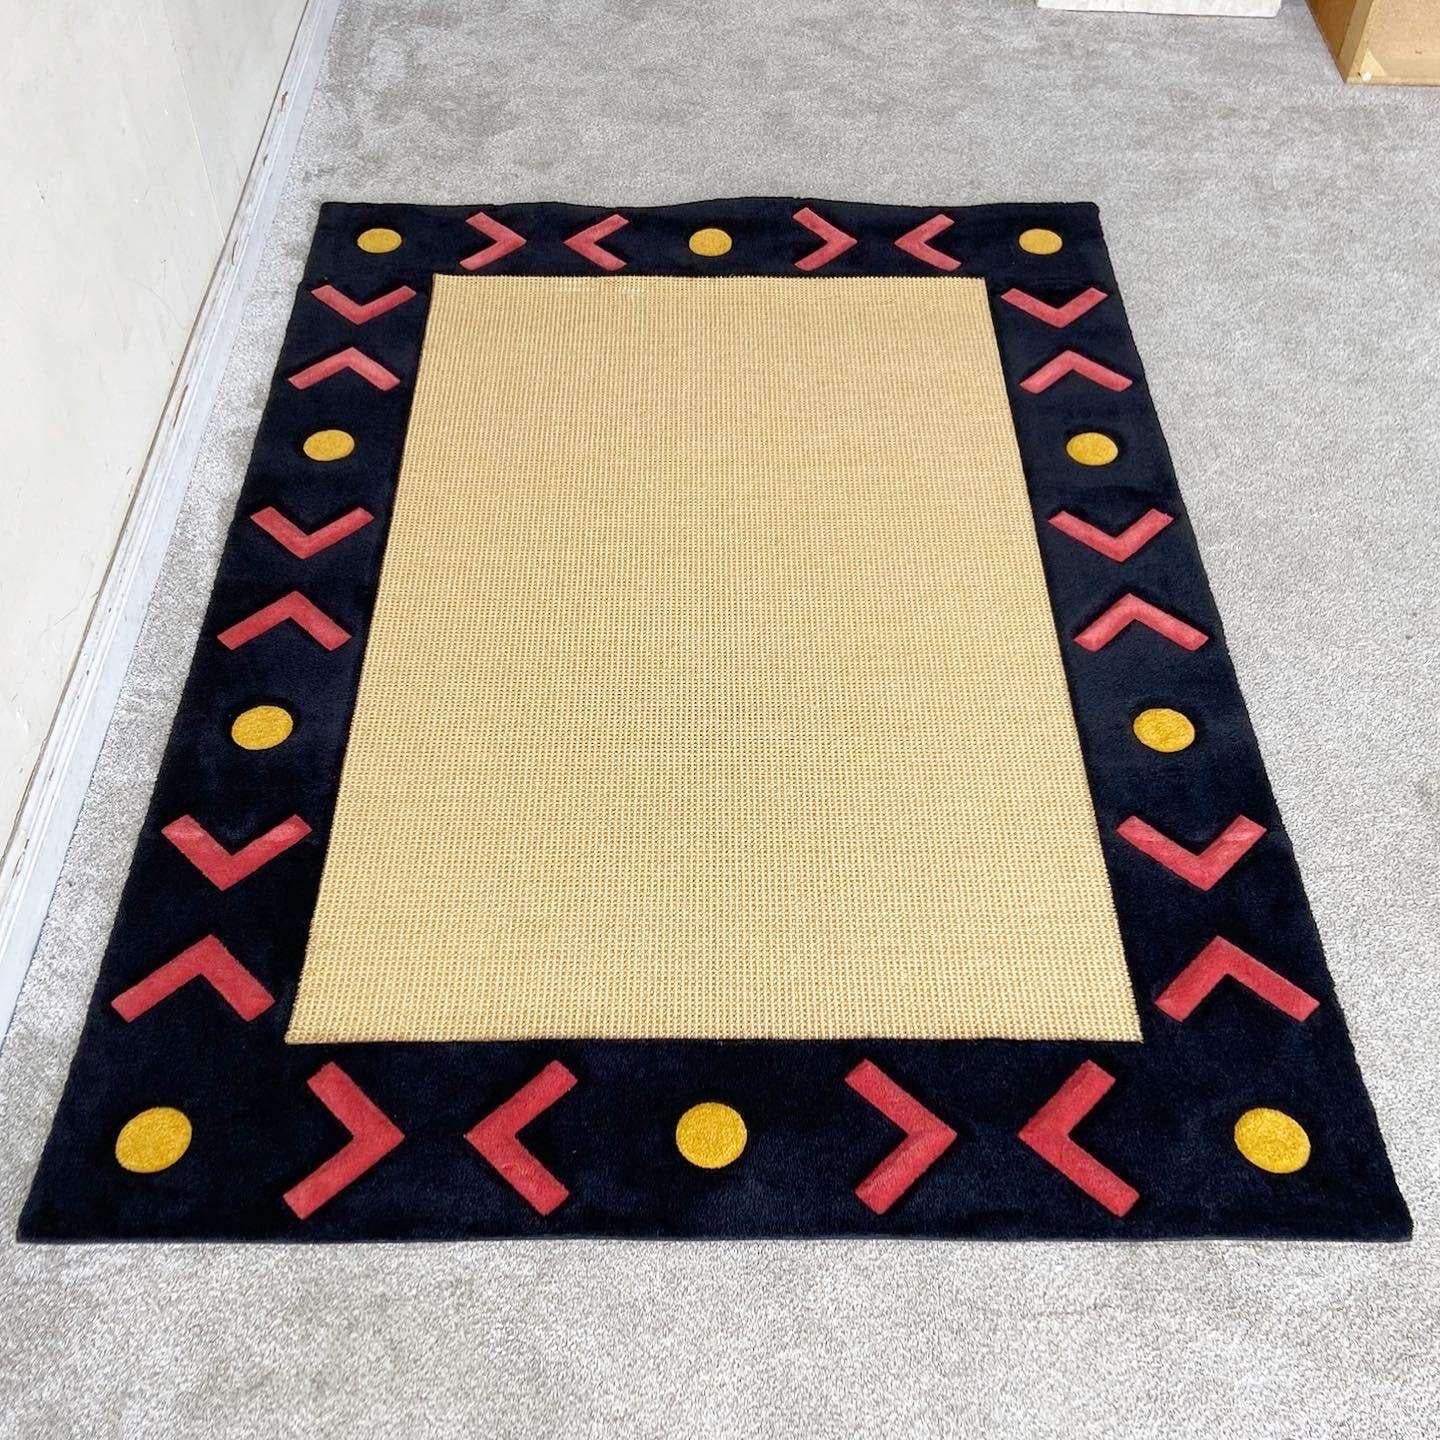 American Boho Southwestern Natural Fiber, Black Red and Yellow Rectangular Area Rug For Sale